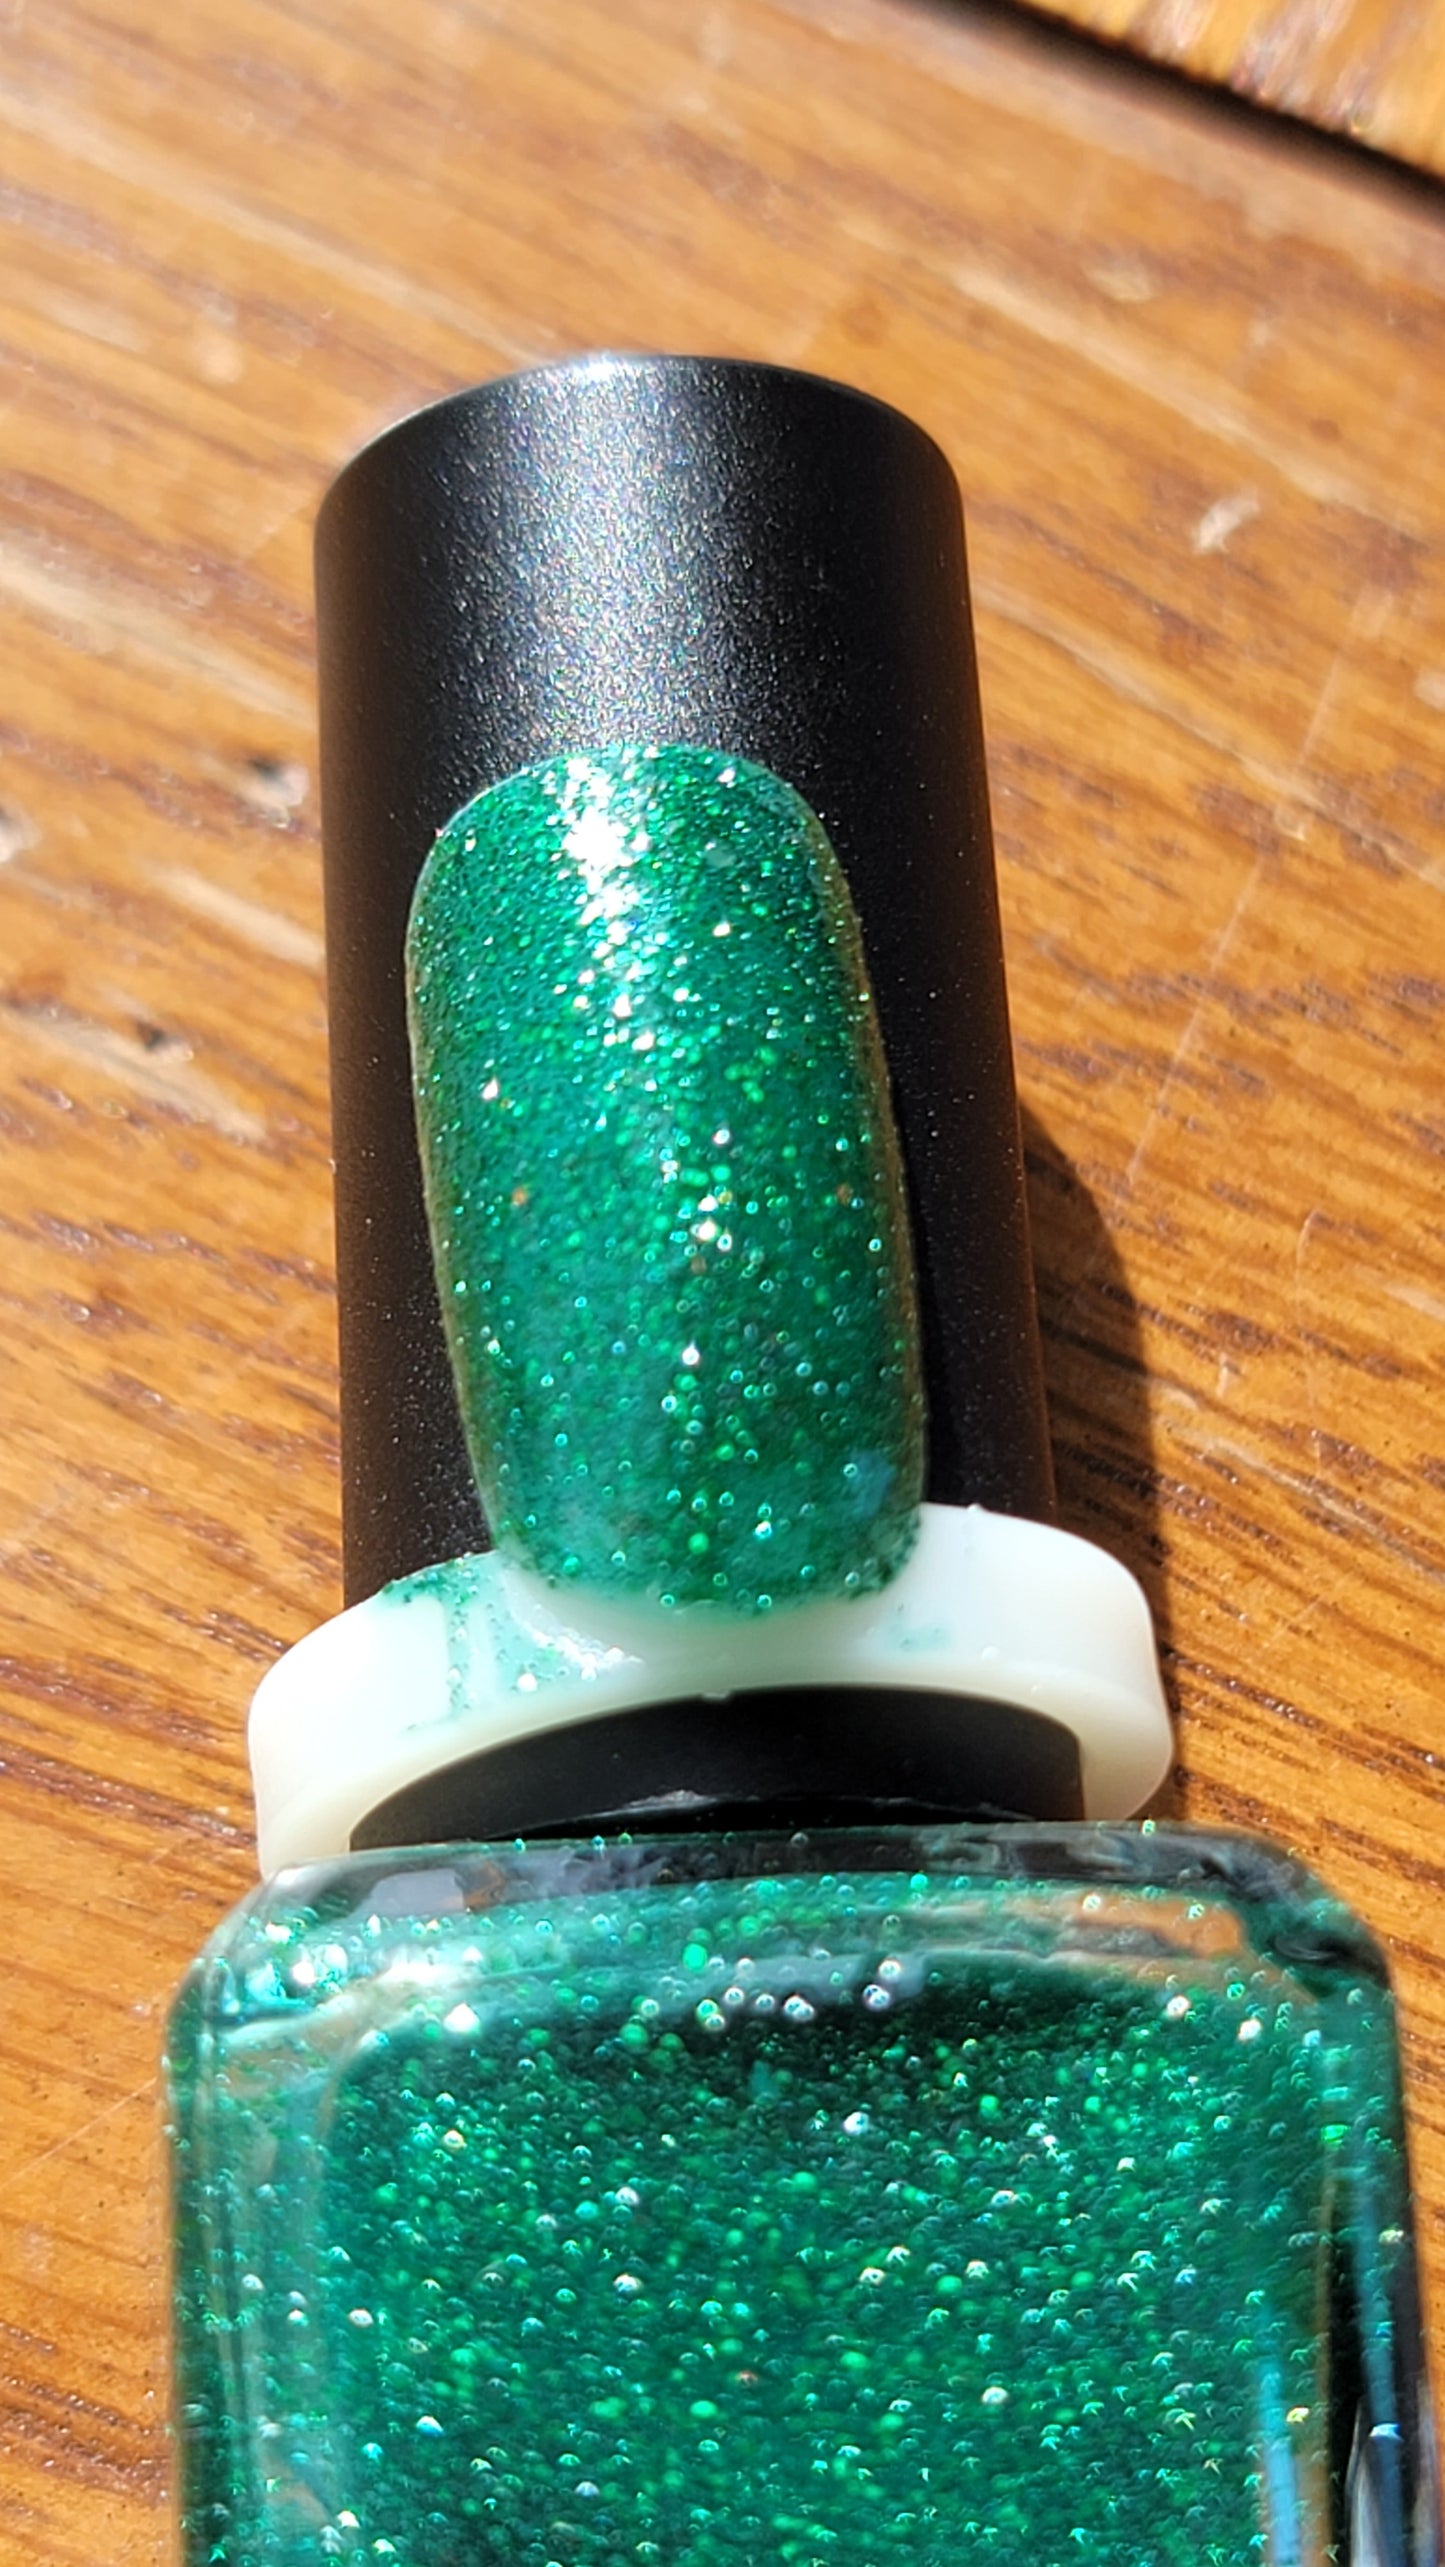 Emerald- May: birthstone collection